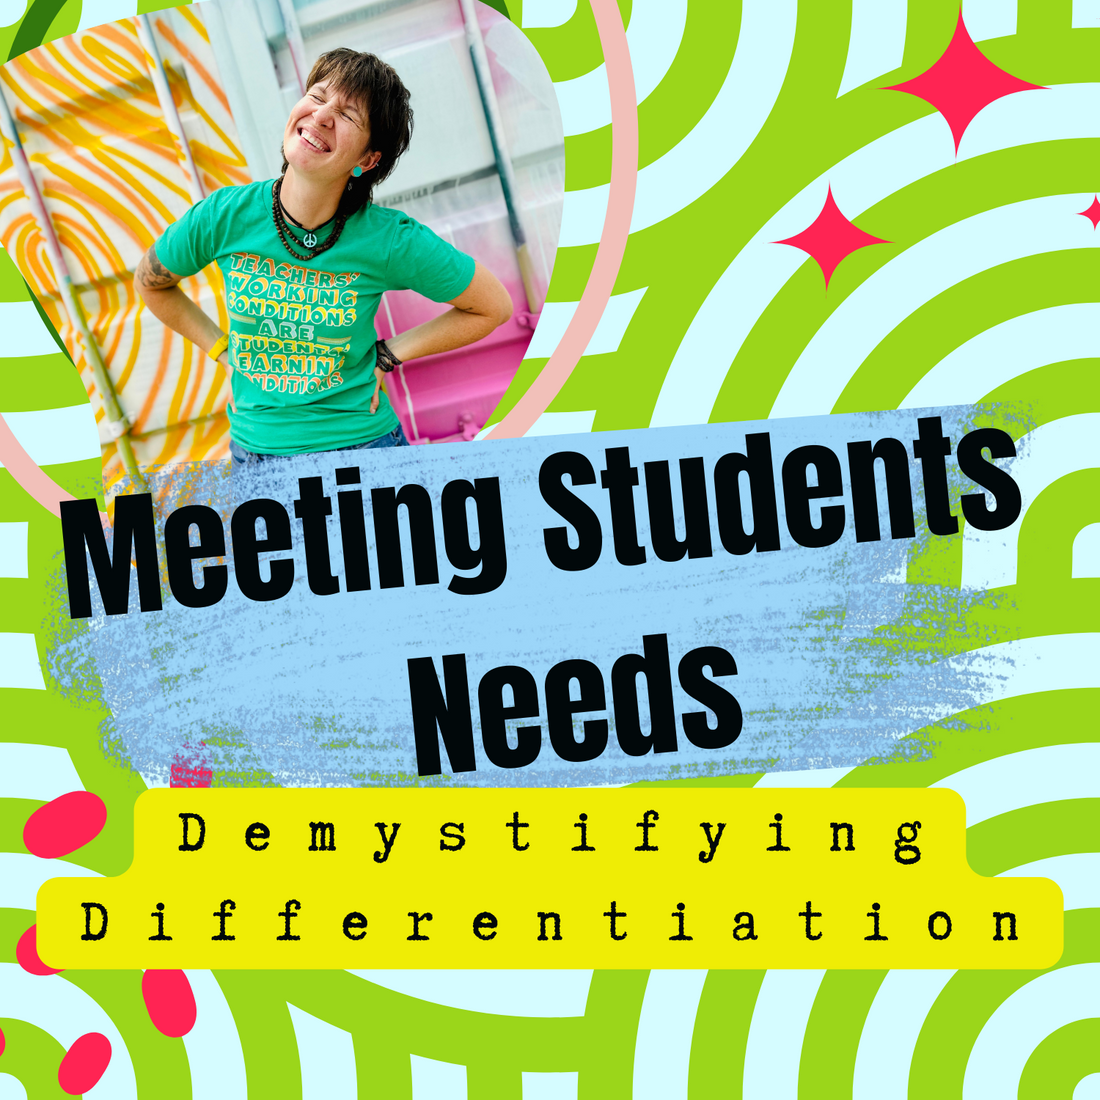 Meeting Students' Needs: Differentiation Tips for Teachers